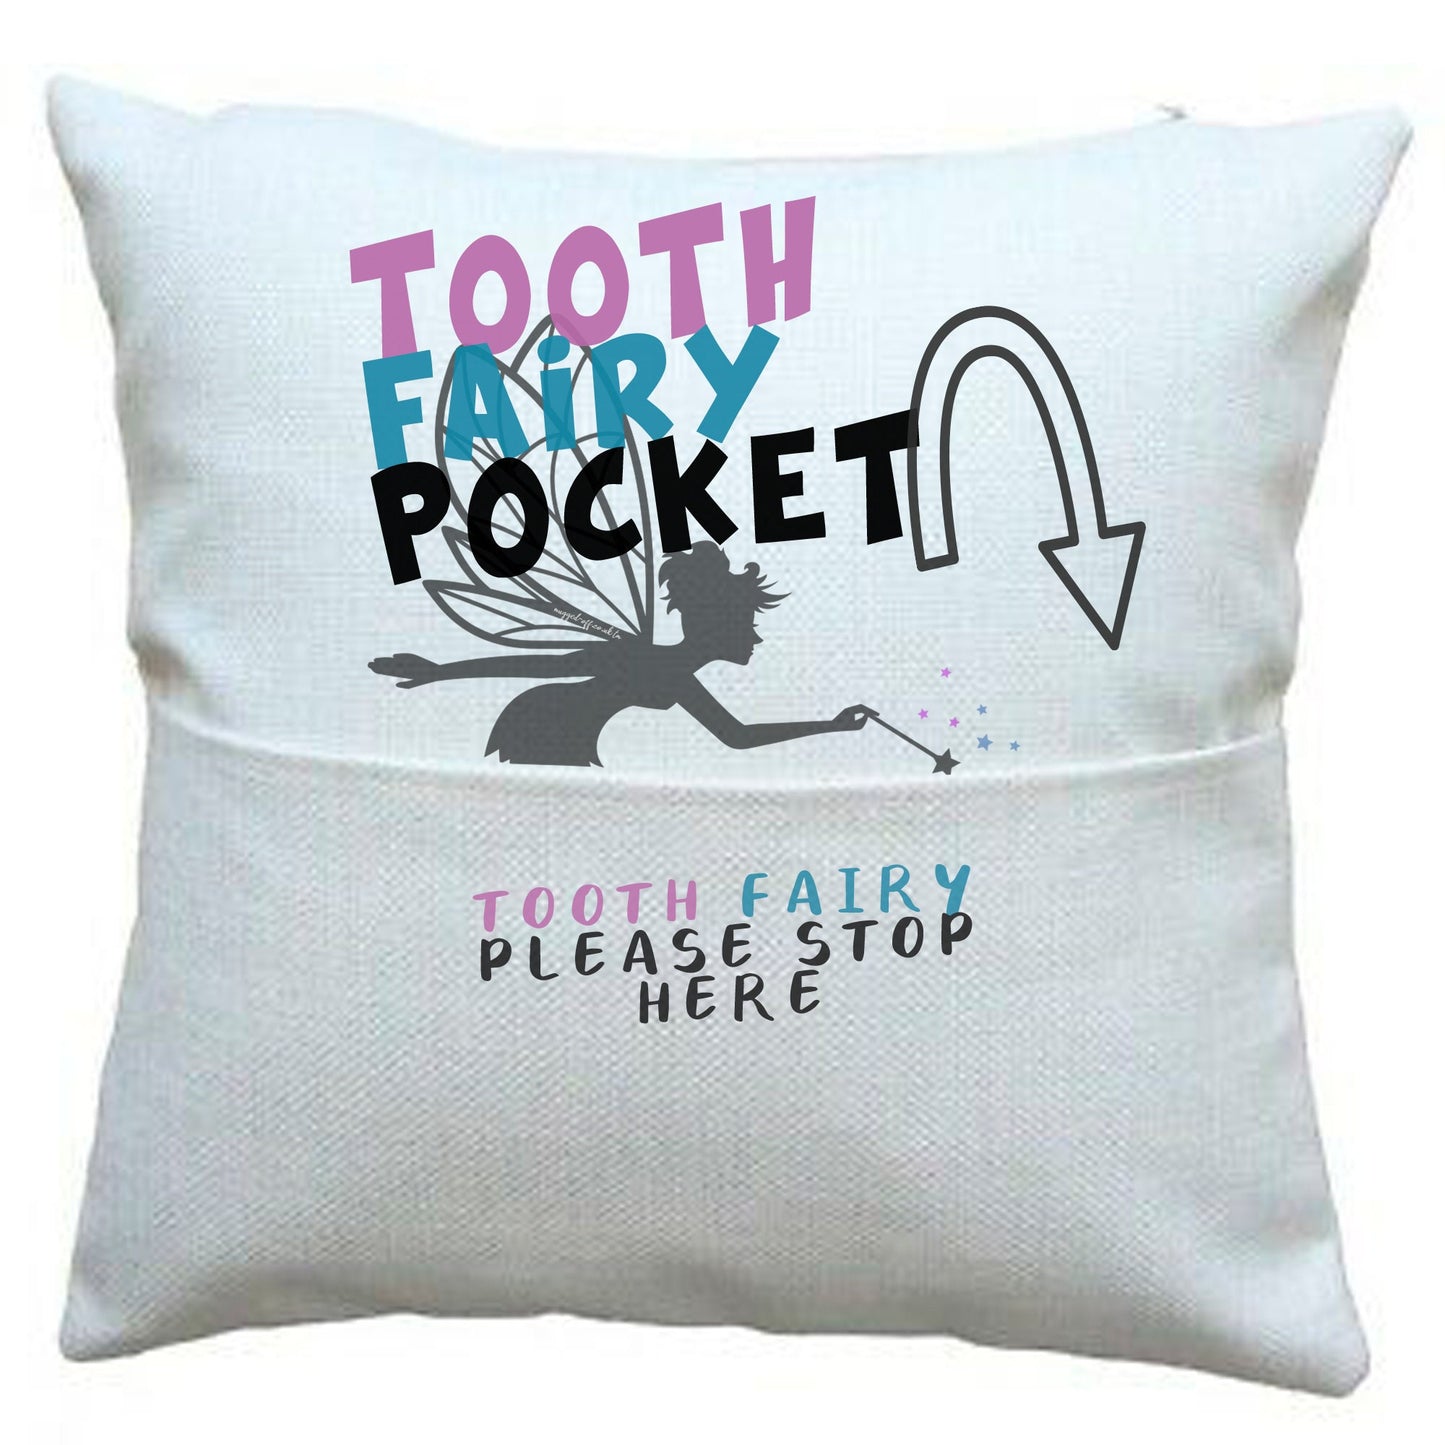 First tooth - the perfect gift for the tooth fairy to come and visit - Tooth fairy gifts Cushion Cover